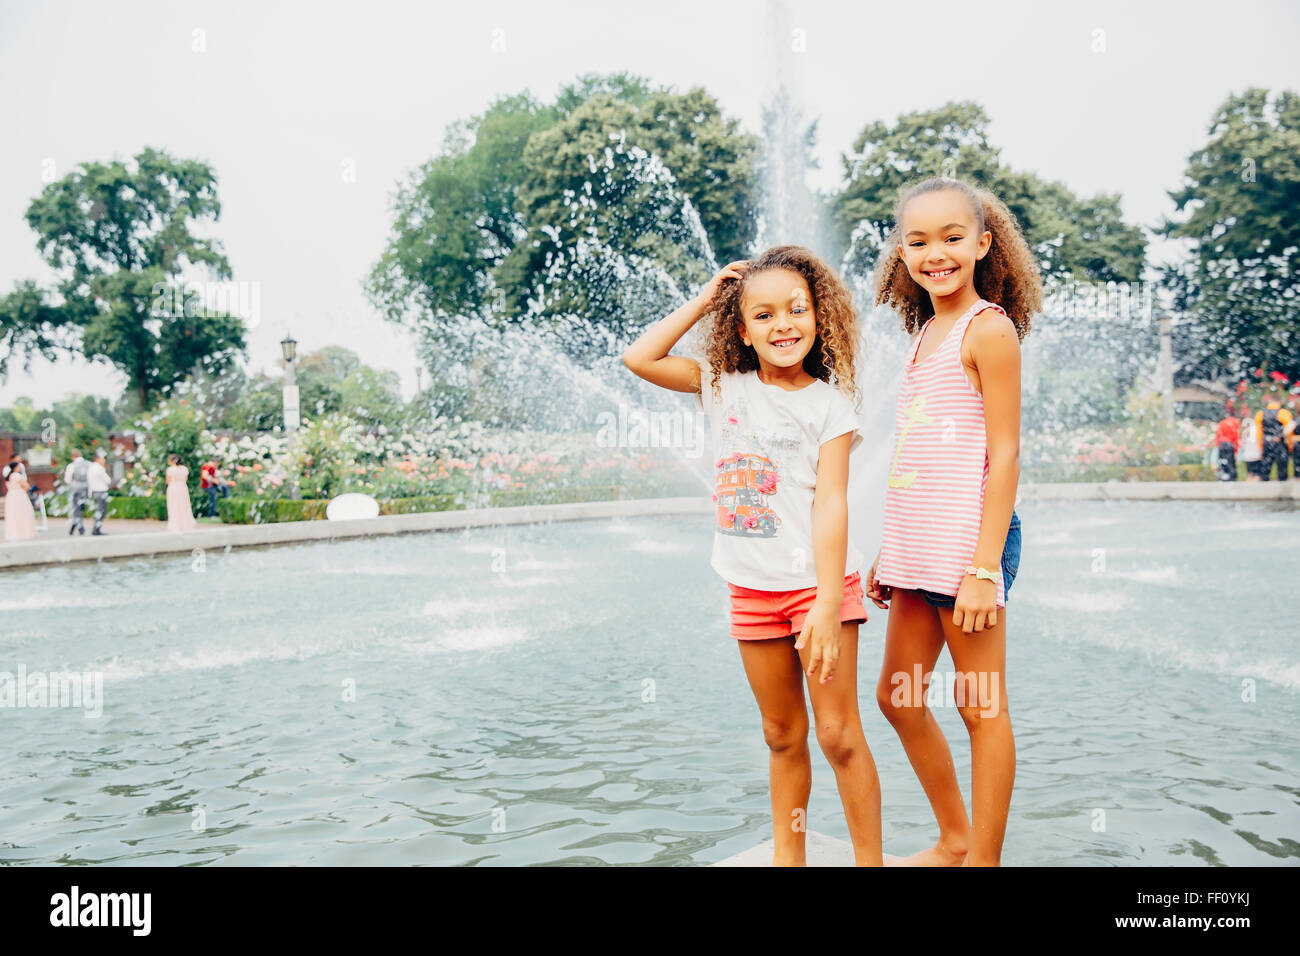 Mixed race sisters smiling in park Stock Photo